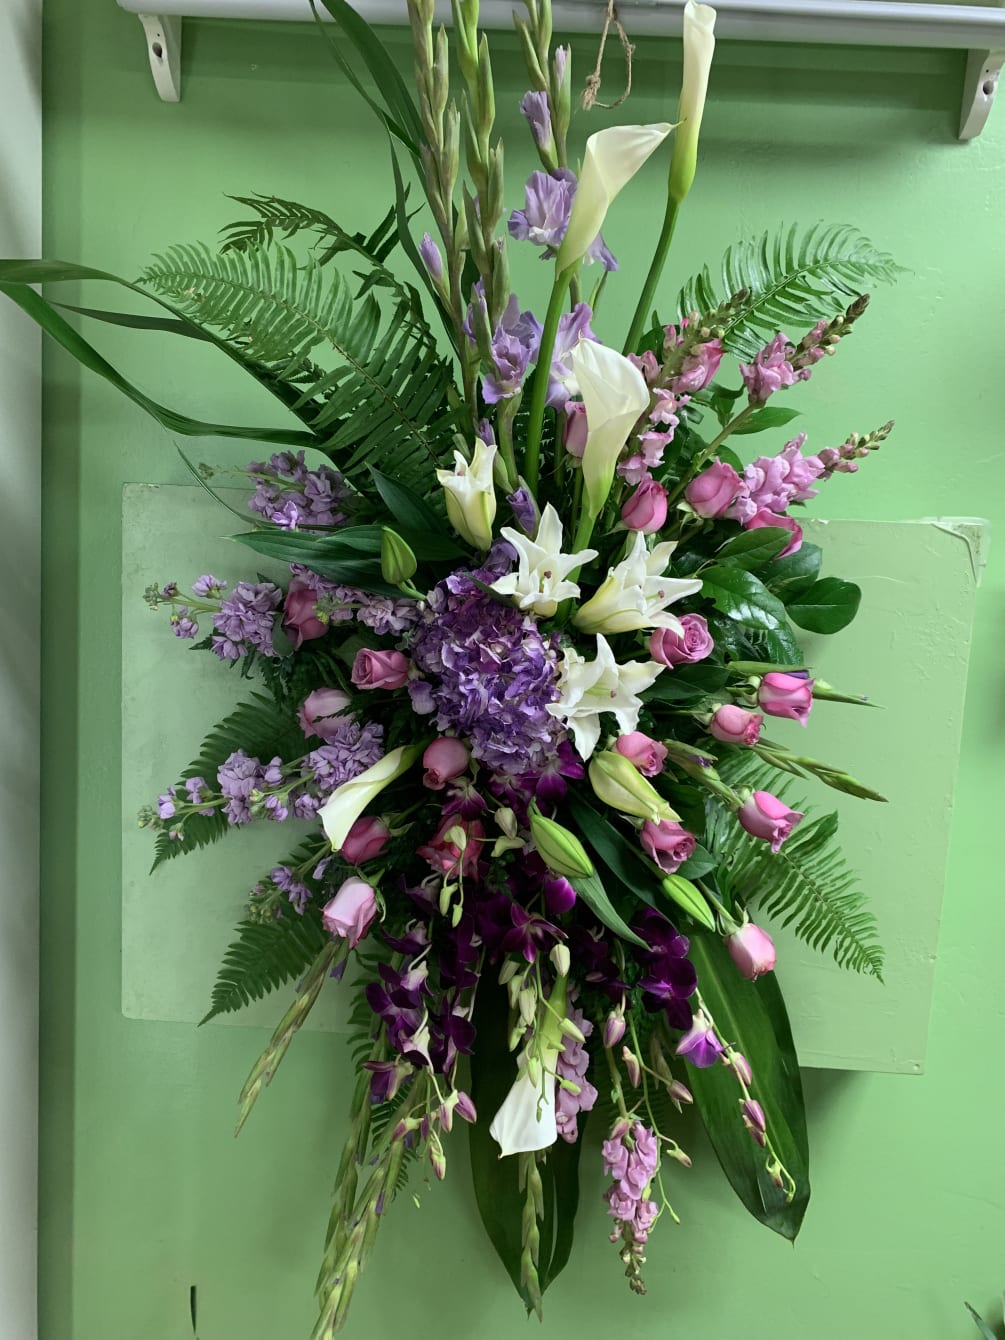 A beautiful elegant combination of high ends flowers in lavender, white, purple!